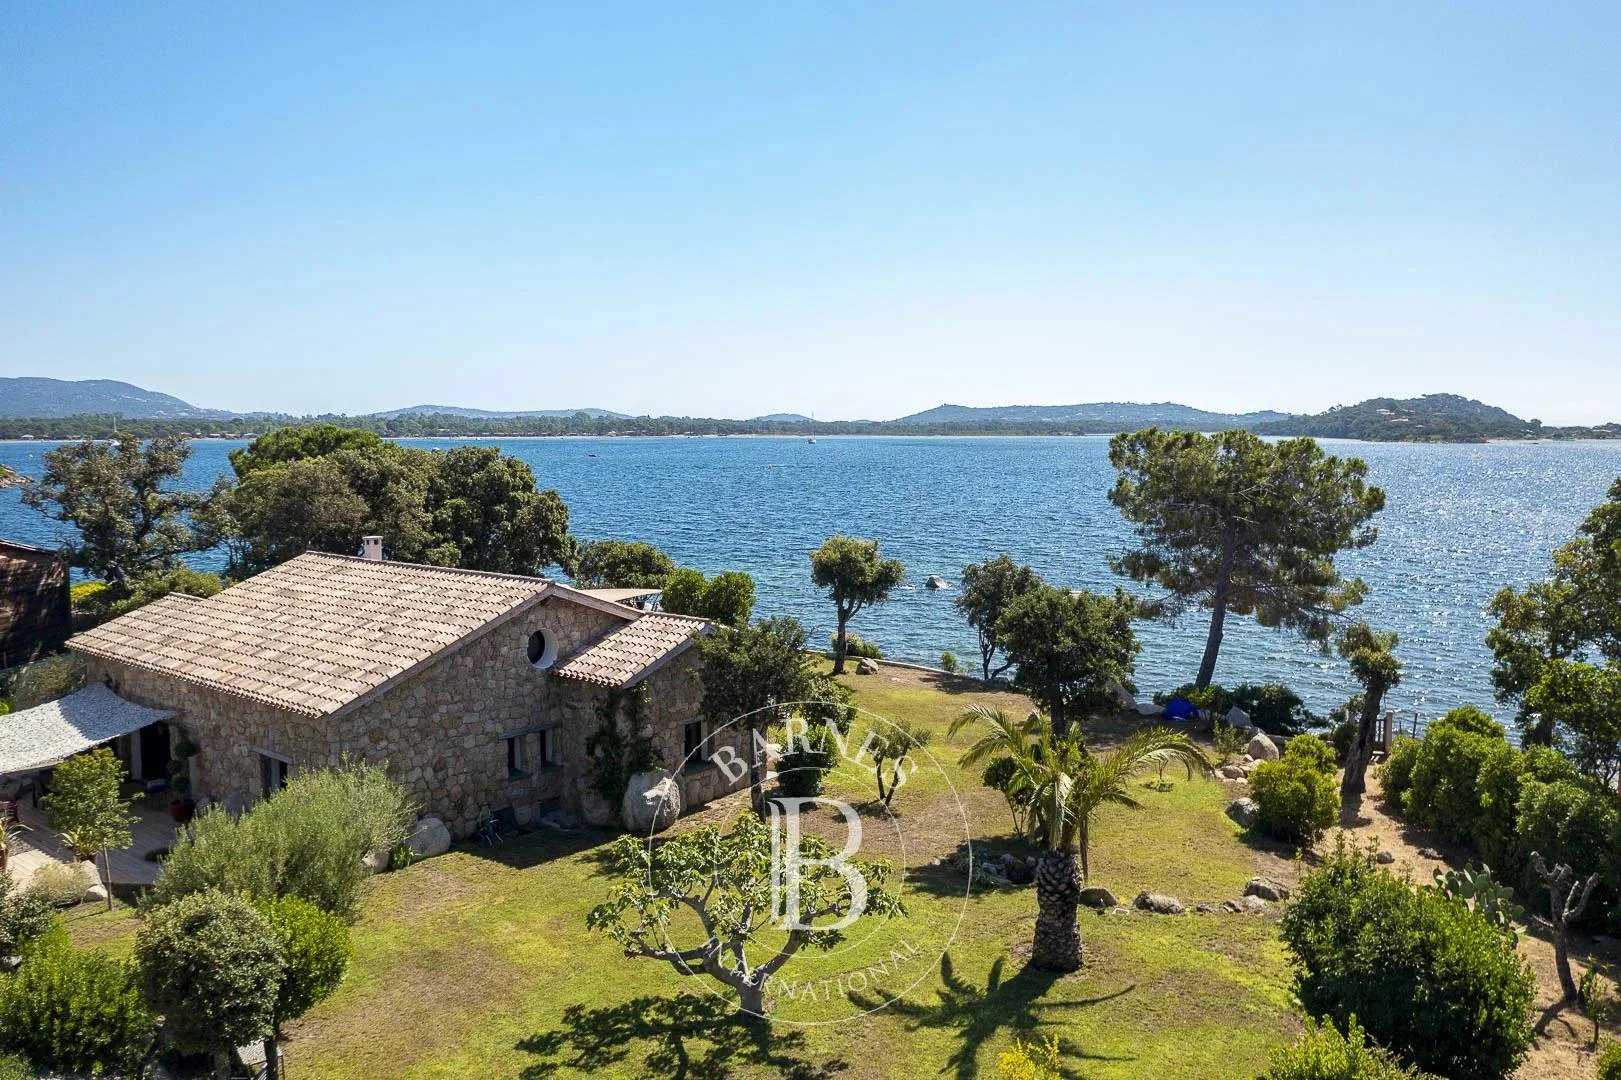 Porto-Vecchio, villa 4 bedrooms and an outbuilding 2 bedrooms, waterfront, pool,  RL331 L'EVIDENZIA picture 20